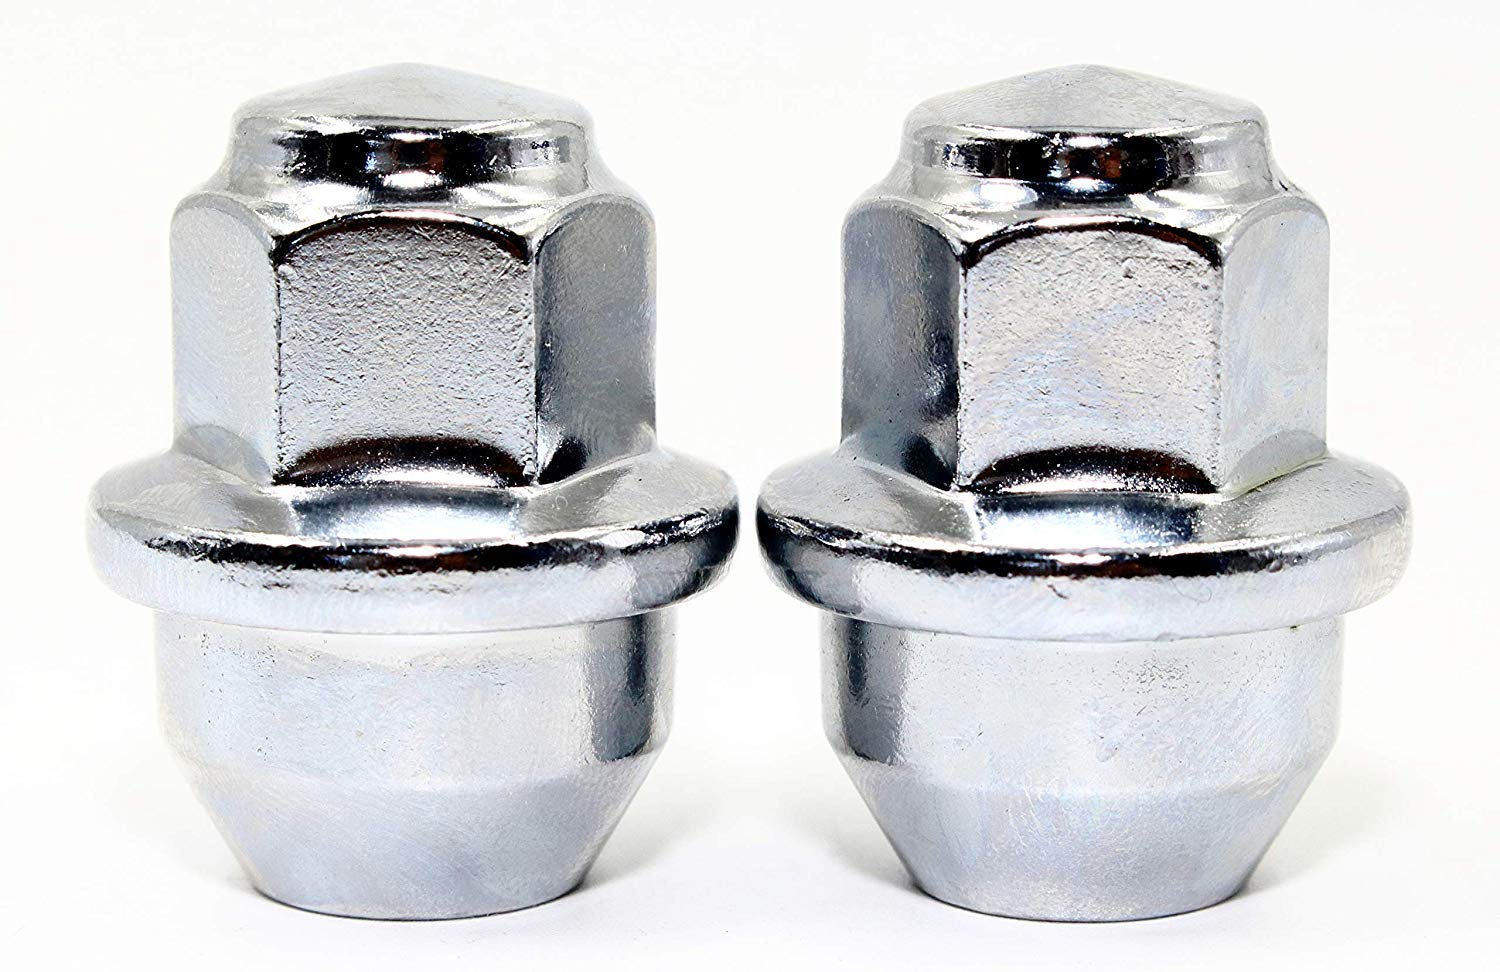 Set of 20 x 19mm hex wheel nuts bolts protectors caps covers in Chrome